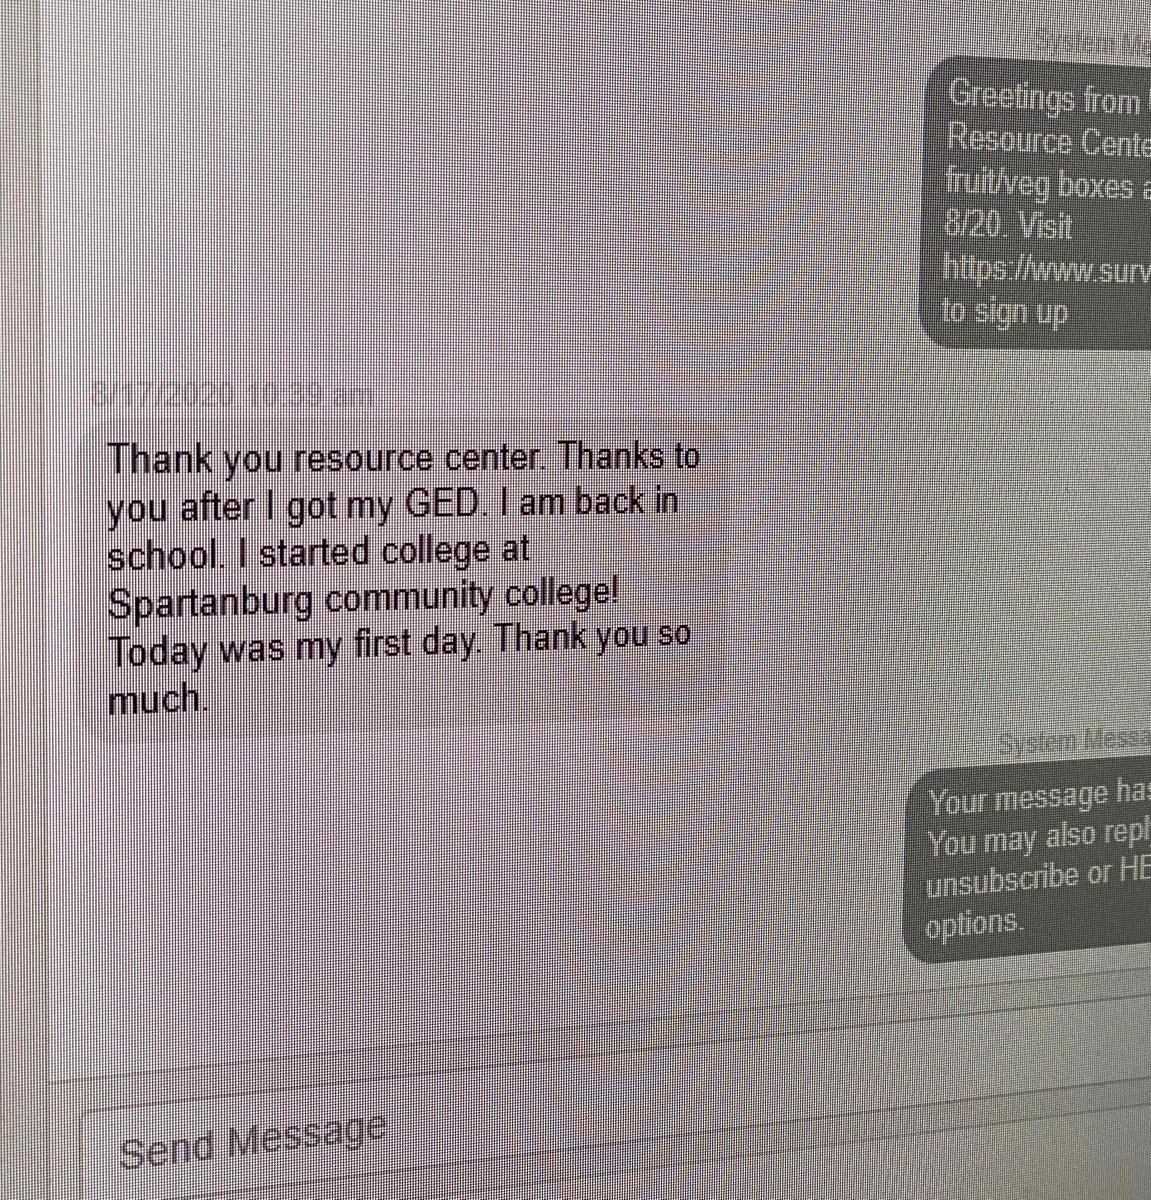 Impact alert for your Monday! We received this message today on our text communication system. Who else is excited for this GED grad?!?! #neverstop #impact #community #ufrcthrive